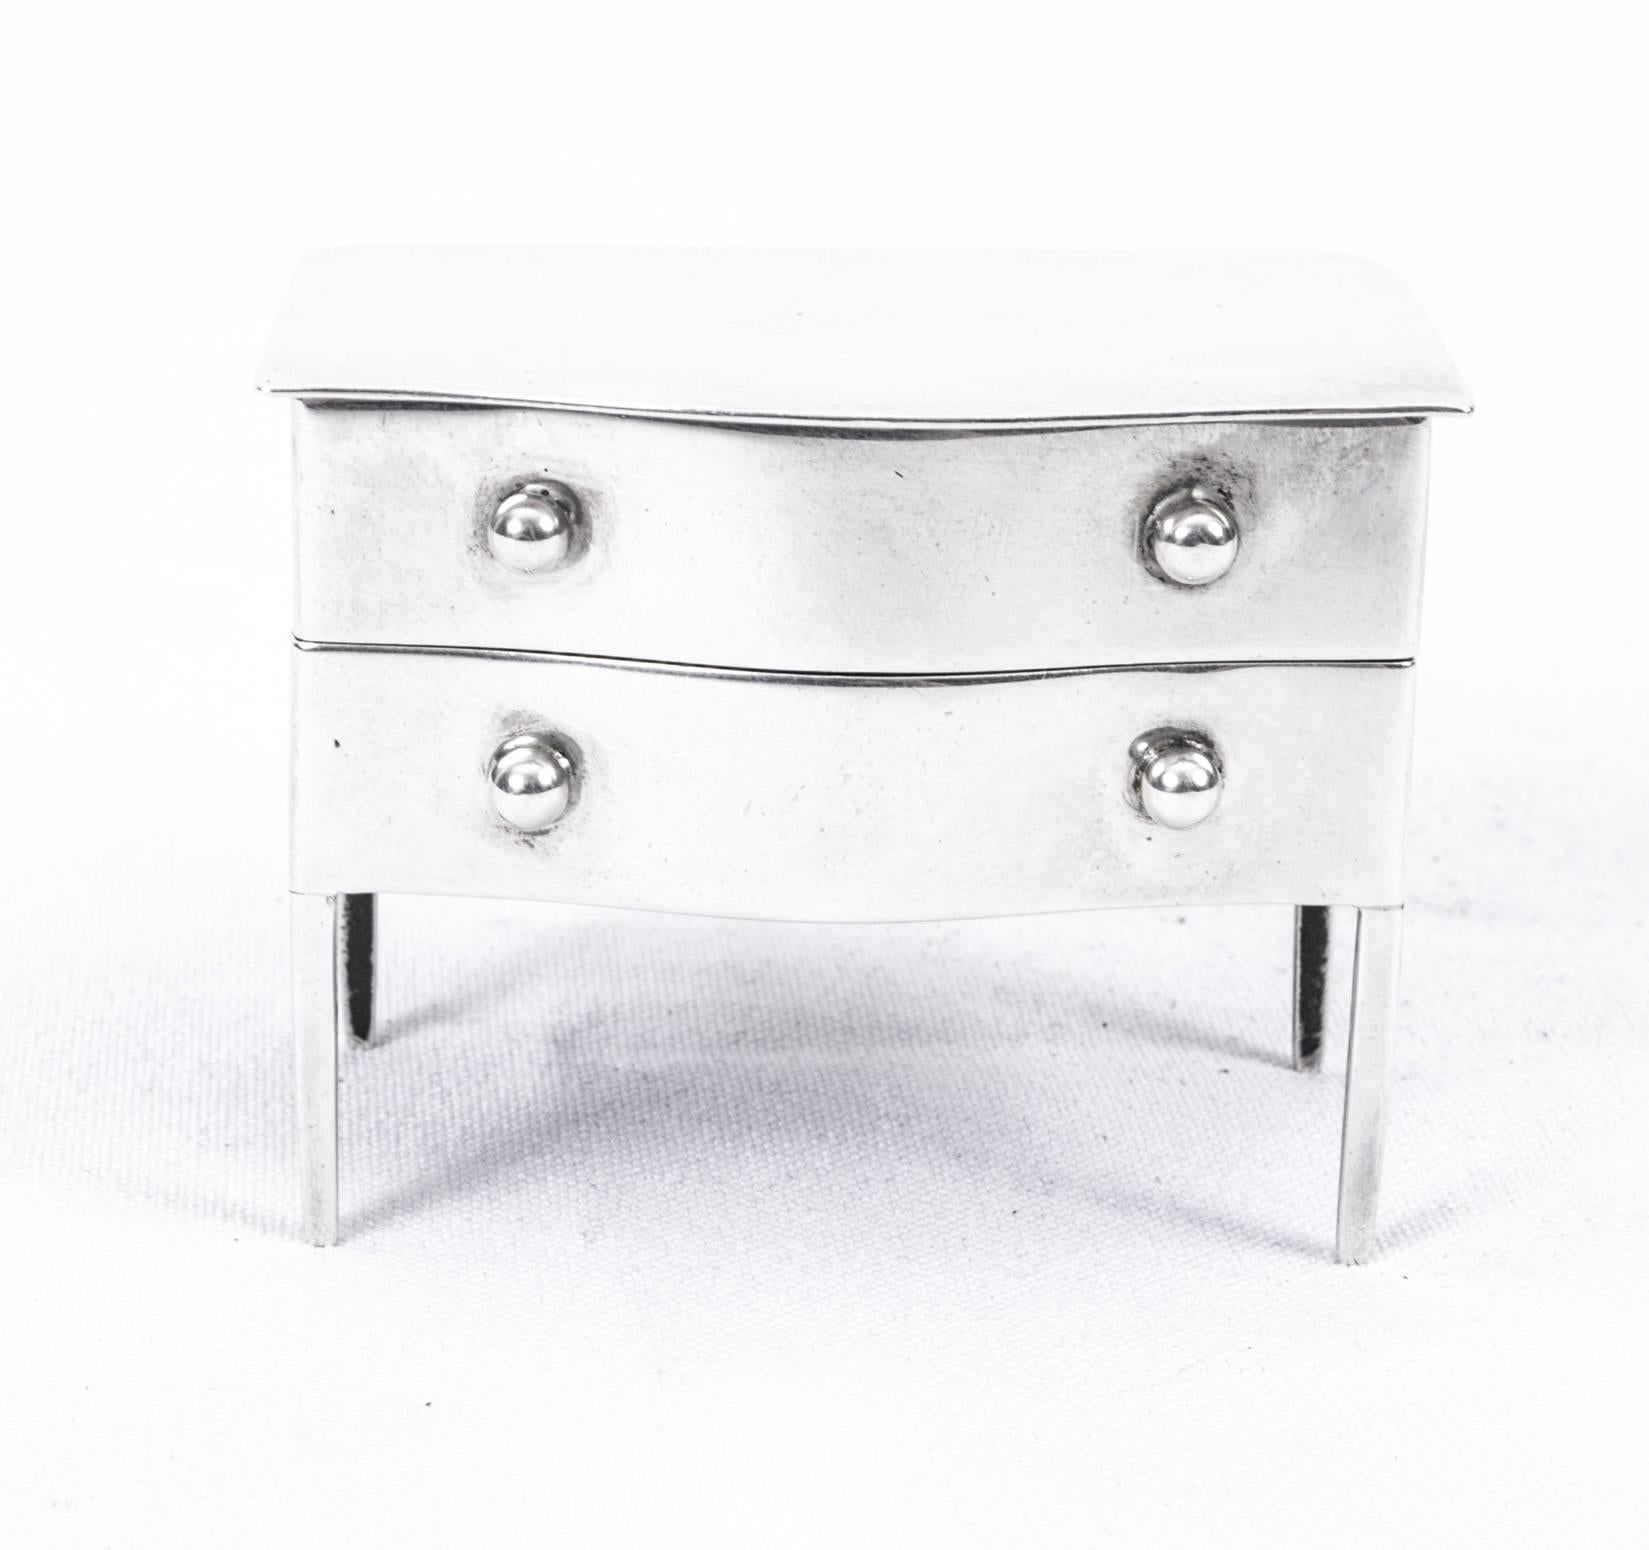 This is a rare and delightful antique Edwardian English solid sterling silver stamp or mini jewel box with hallmarks for London, 1909 and the makers mark of the world-renowned retailer and silversmith, Asprey's of Bond Street, London and the patent